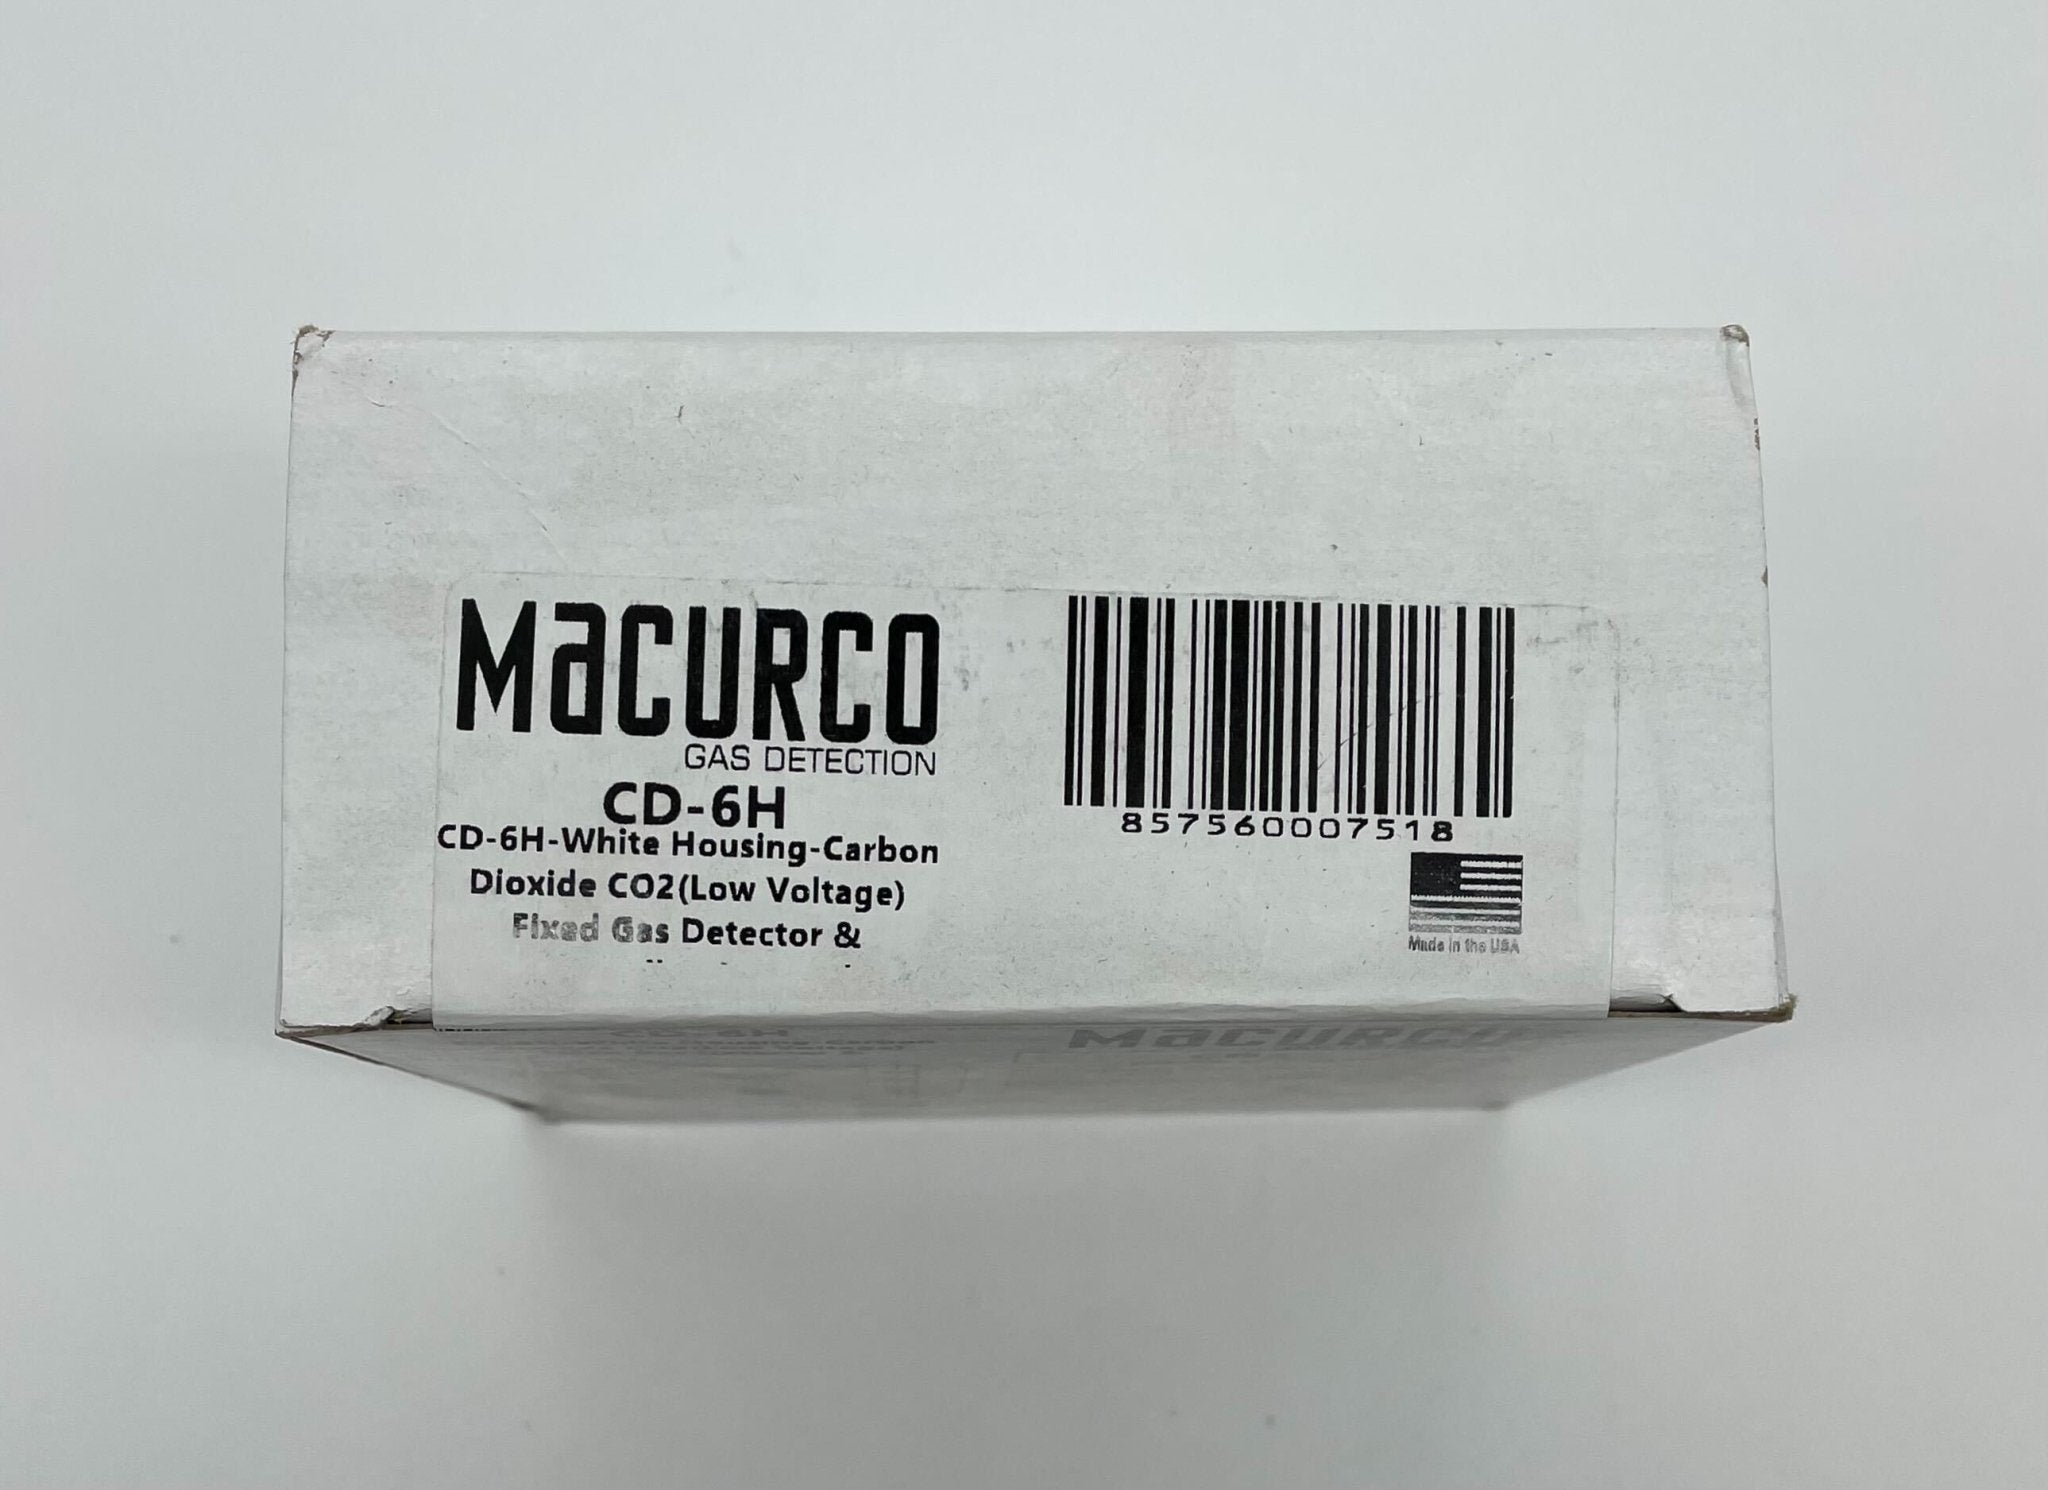 Macurco CD-6H Carbon Dioxide Gas Detector - The Fire Alarm Supplier